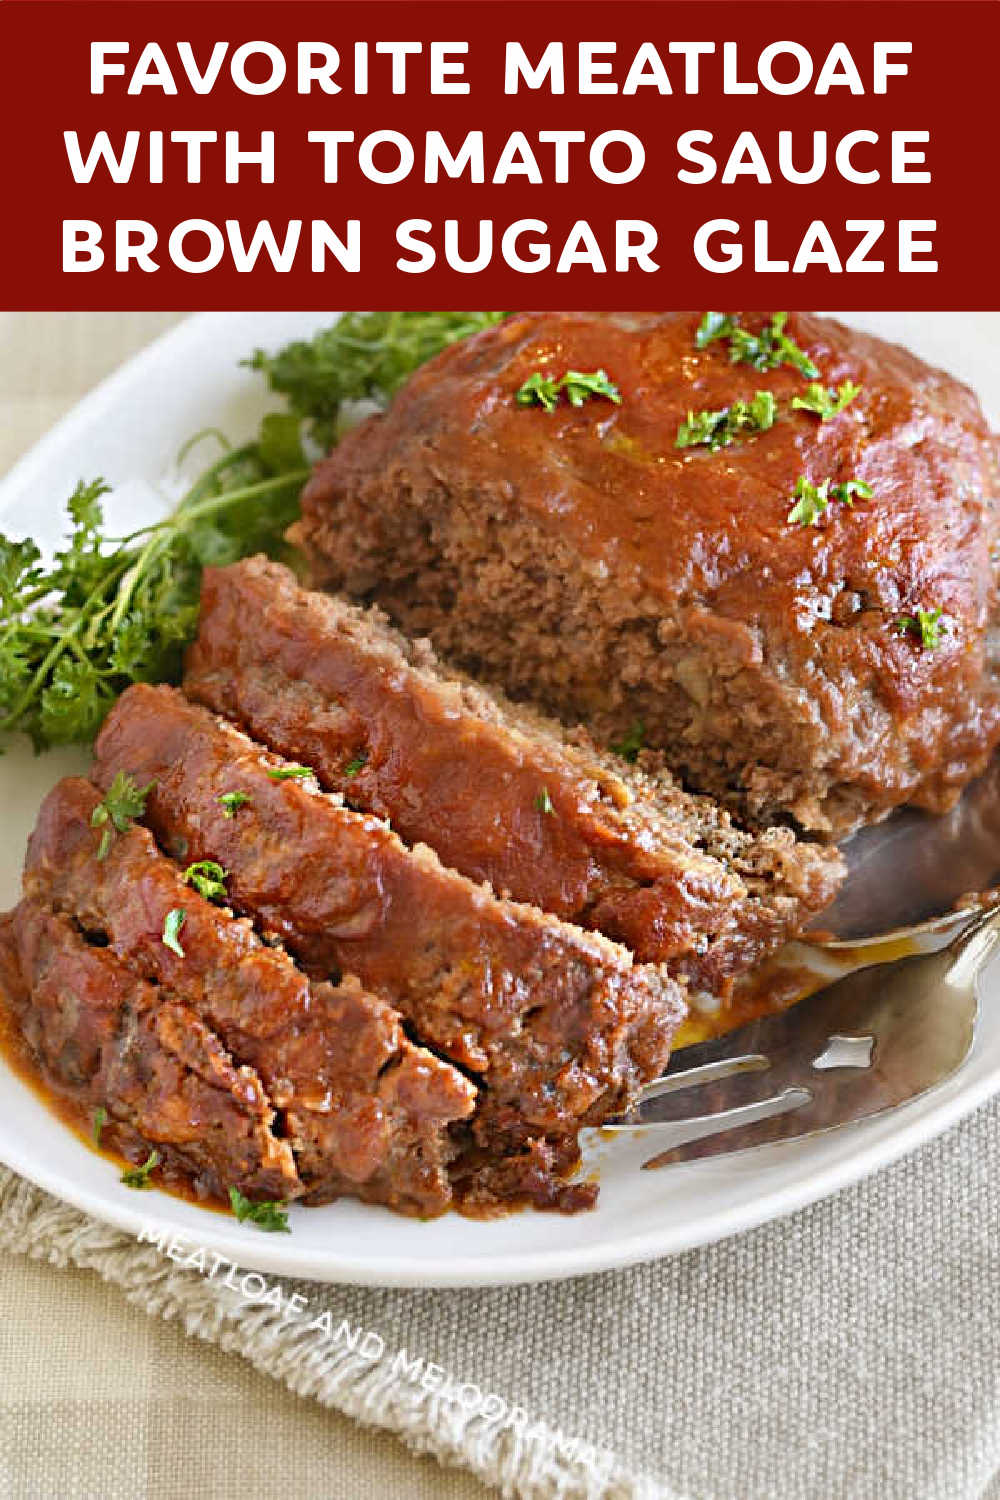 My Favorite Meatloaf Recipe with Tomato Sauce and brown sugar glaze is flavorful, fork tender and delicious. An easy dinner everyone loves, this classic meatloaf recipe is perfect for busy weeknights! via @meamel